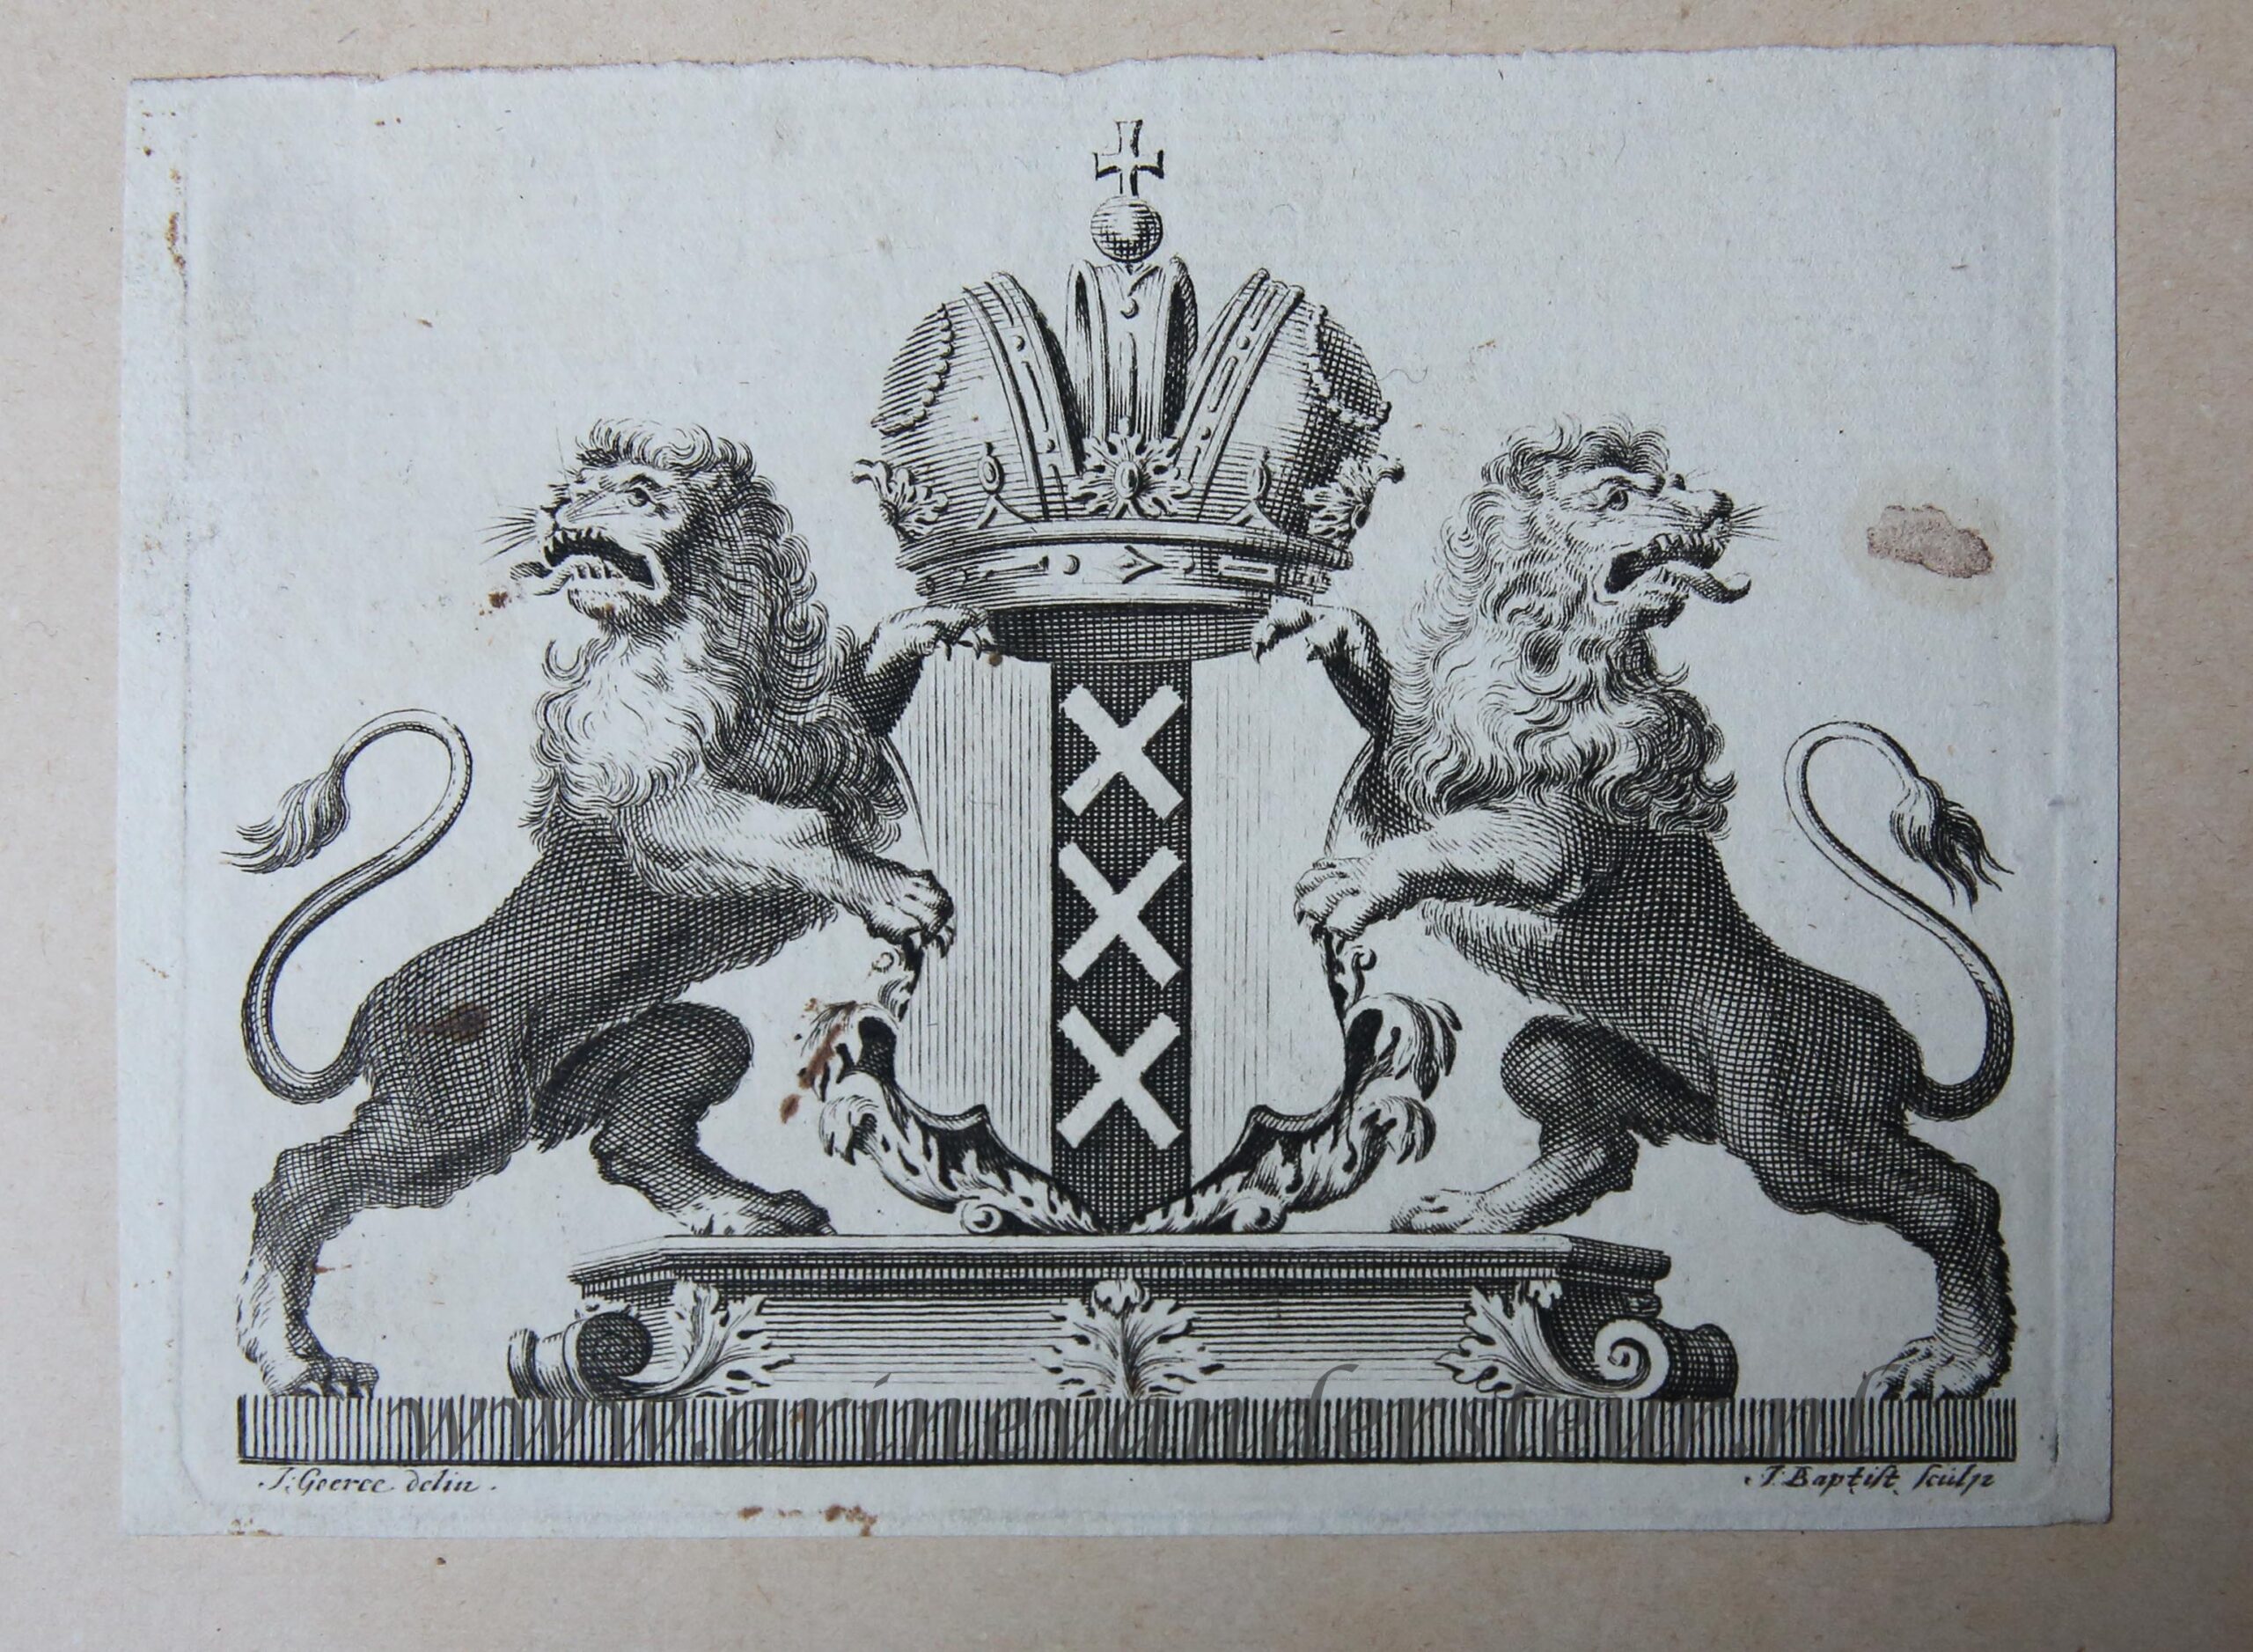 [Antique print, vignette, ca. 1700] Vignette with the arms of Amsterdam, published ca. 1700, 1 p.